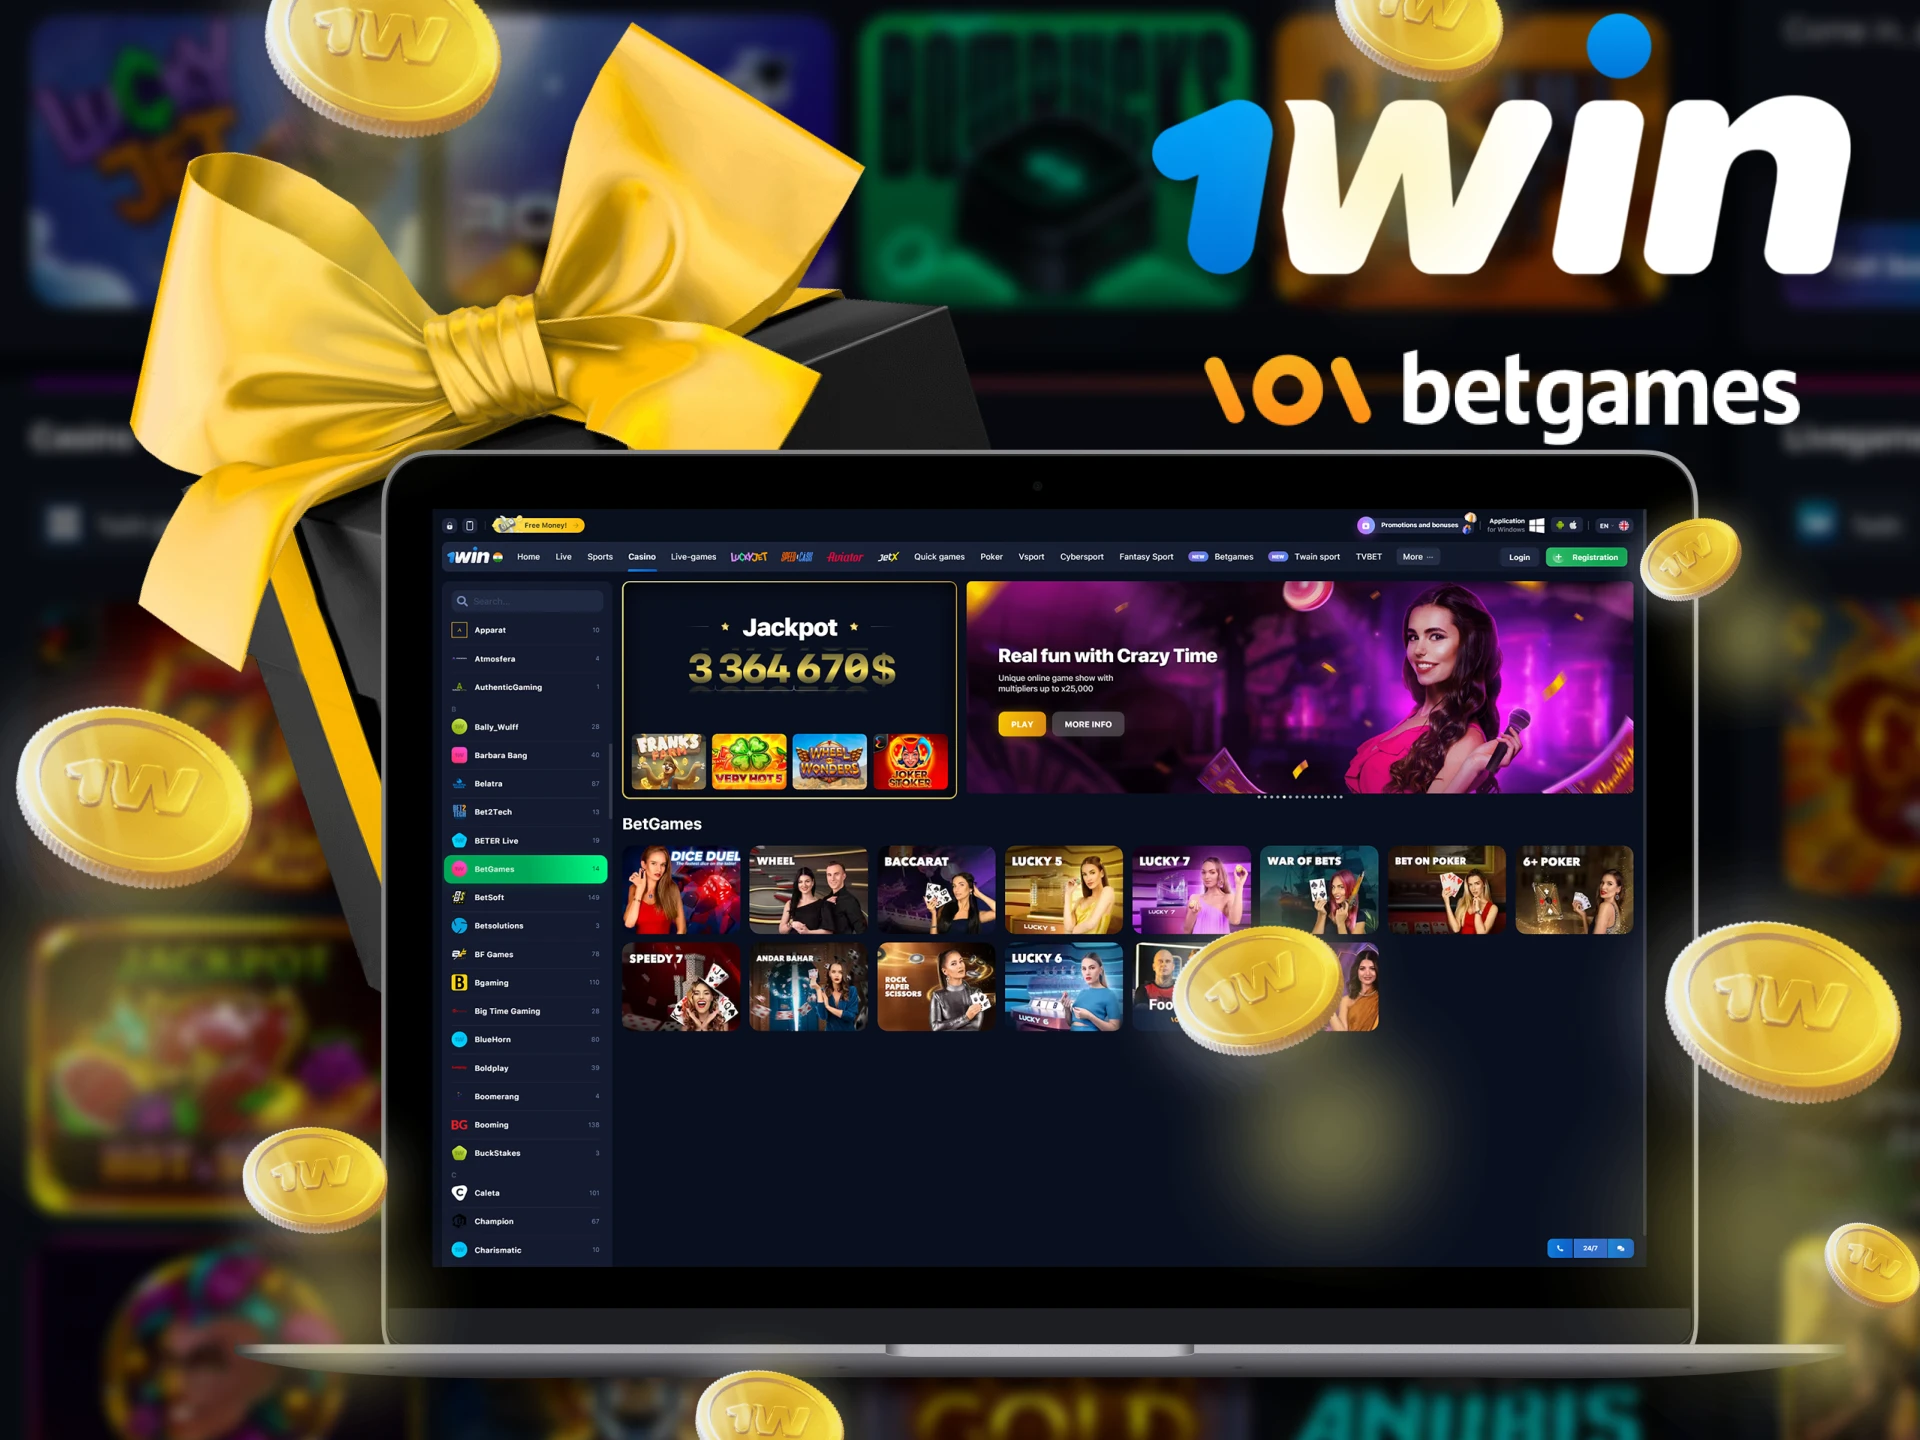 At 1Win, you have a lot of benefits for games from BetGames.